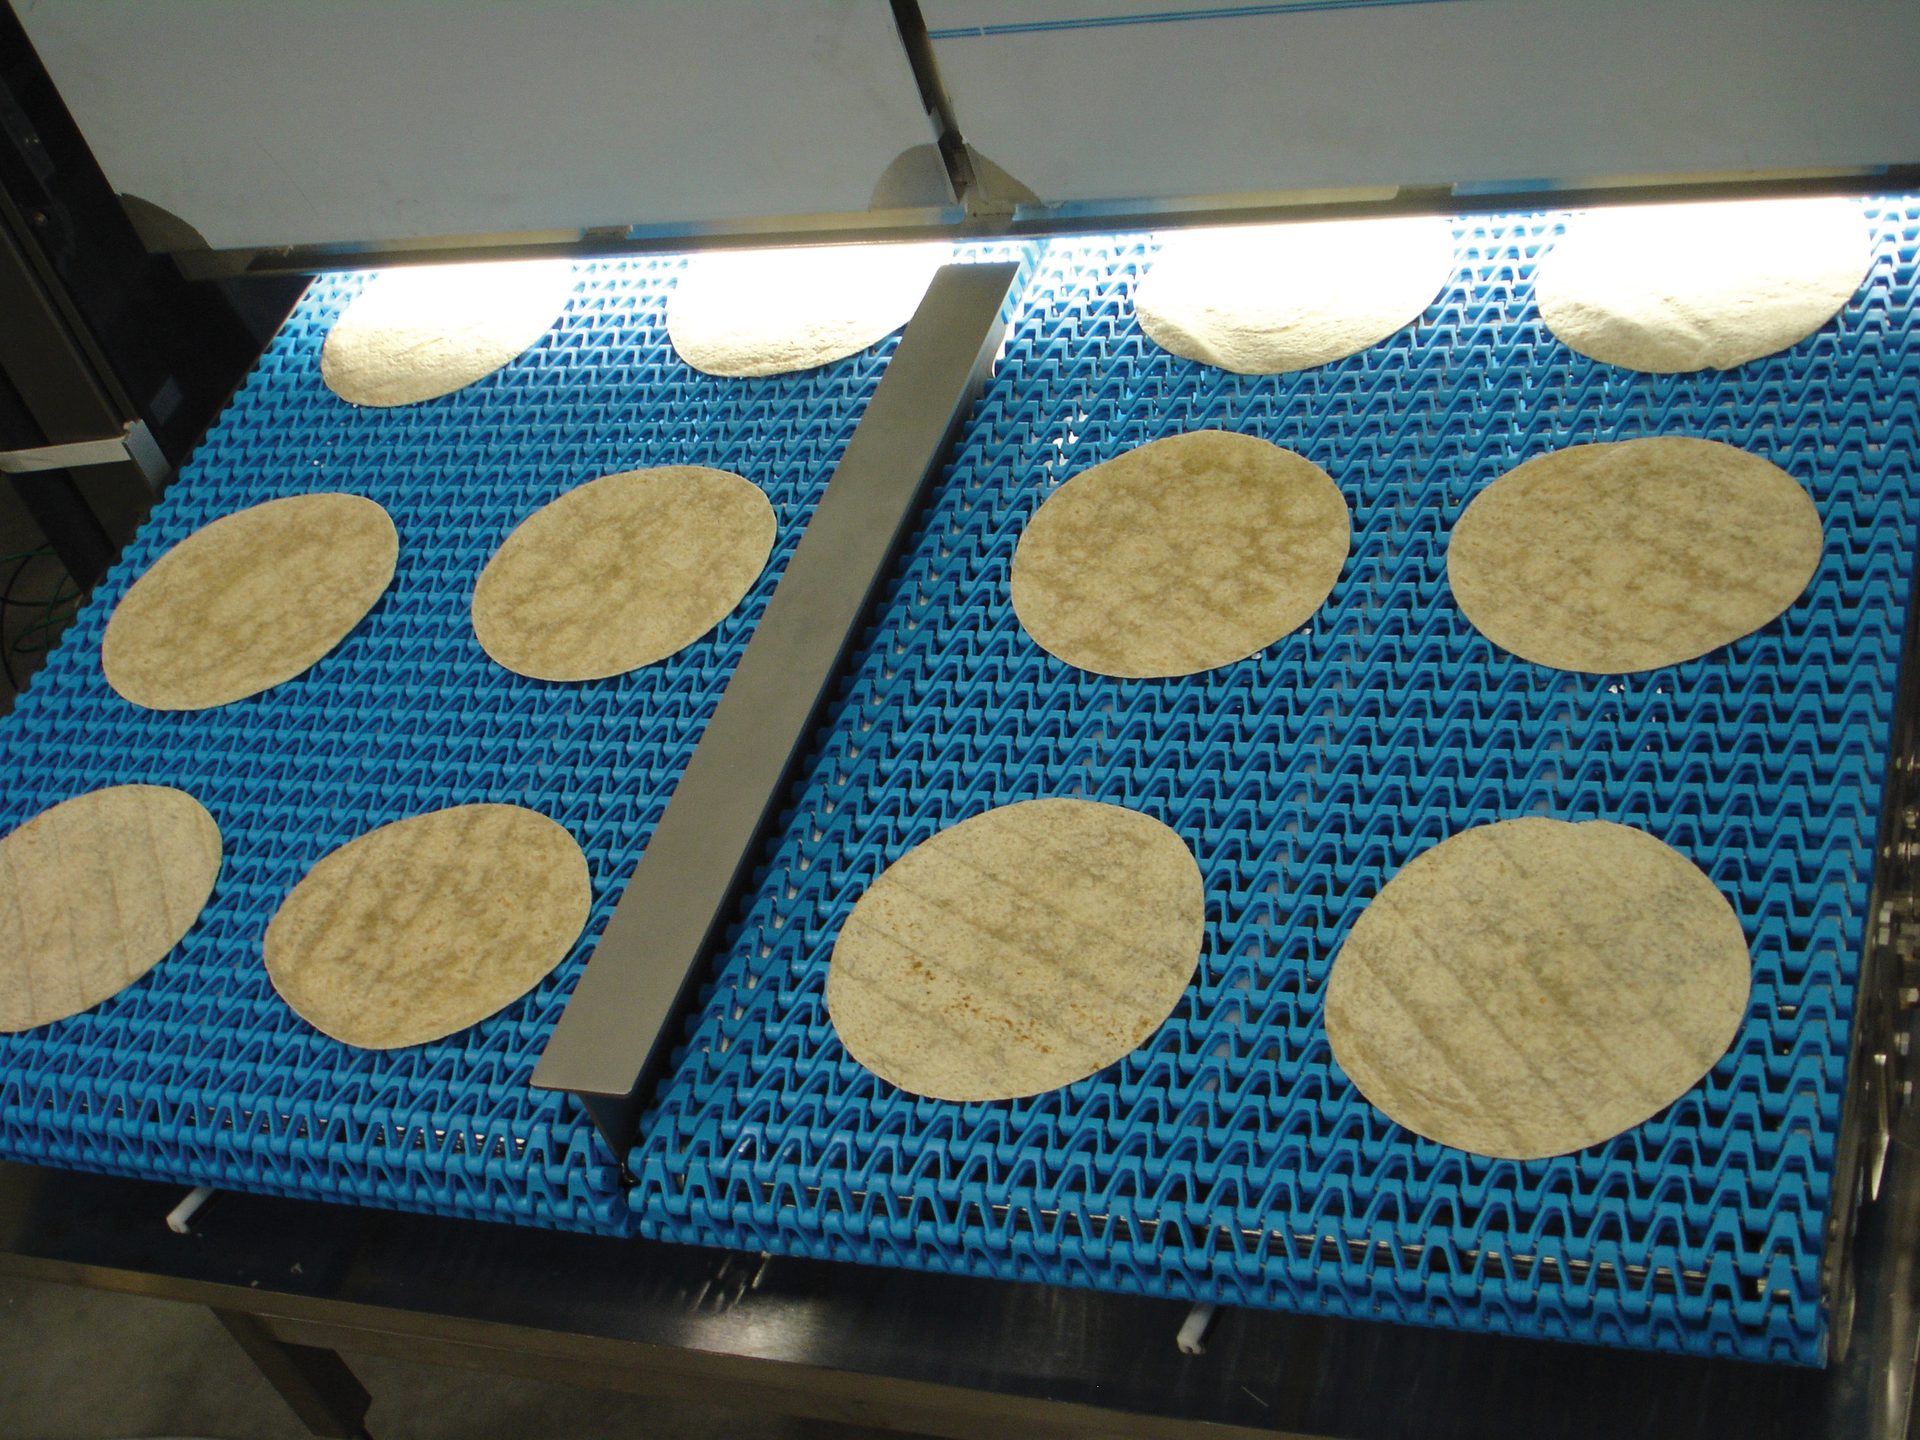 Rectangle, Stacking and loading, Conveyor, Tortillas